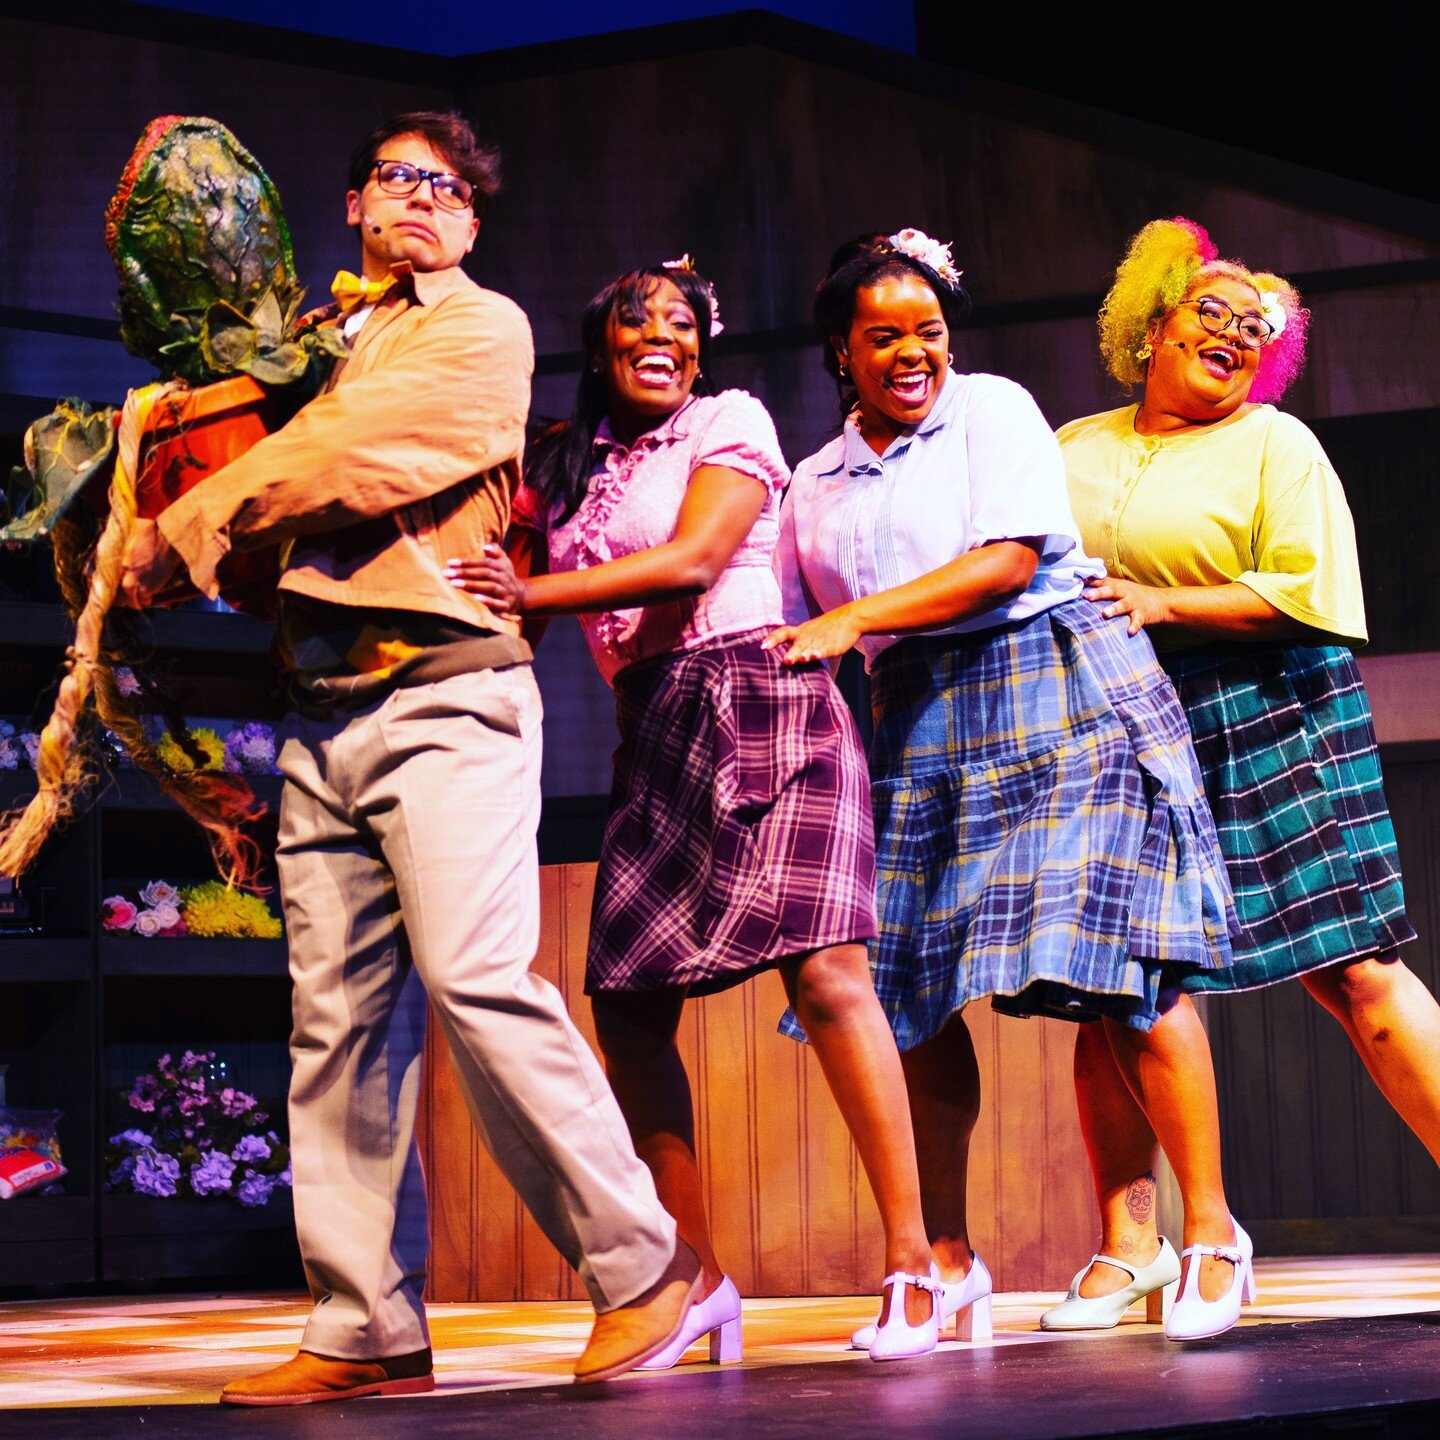 Little Shop of Horrors at the Straz runs until May 1. Get tickets before they're eaten up